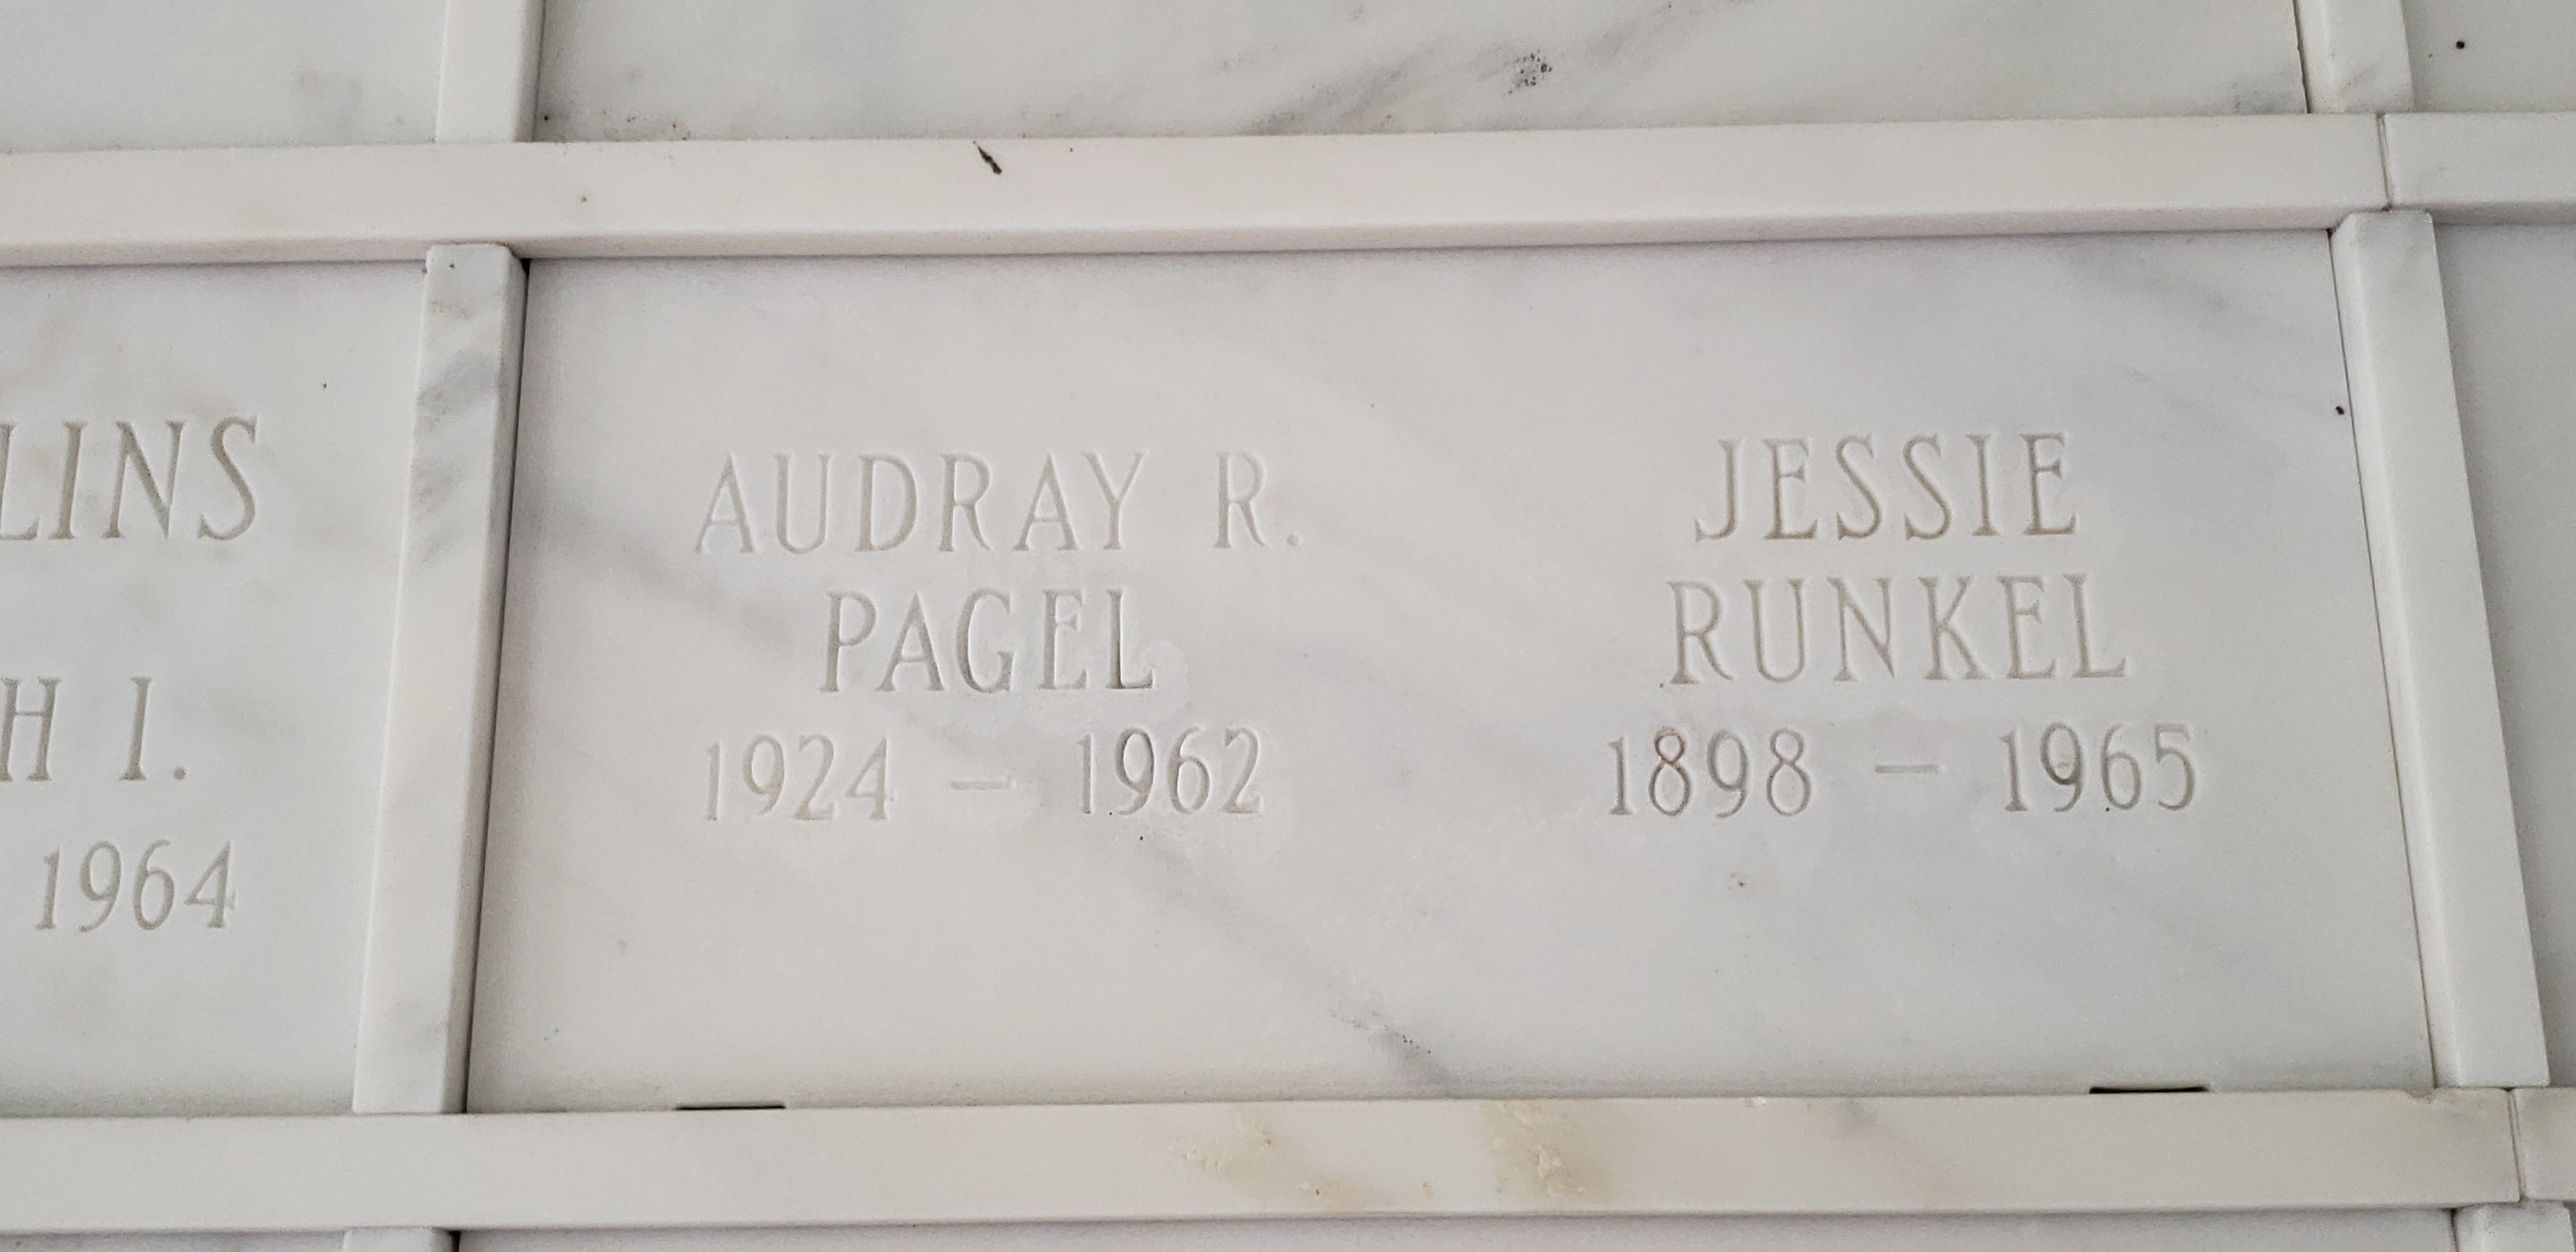 Audray R Pagel